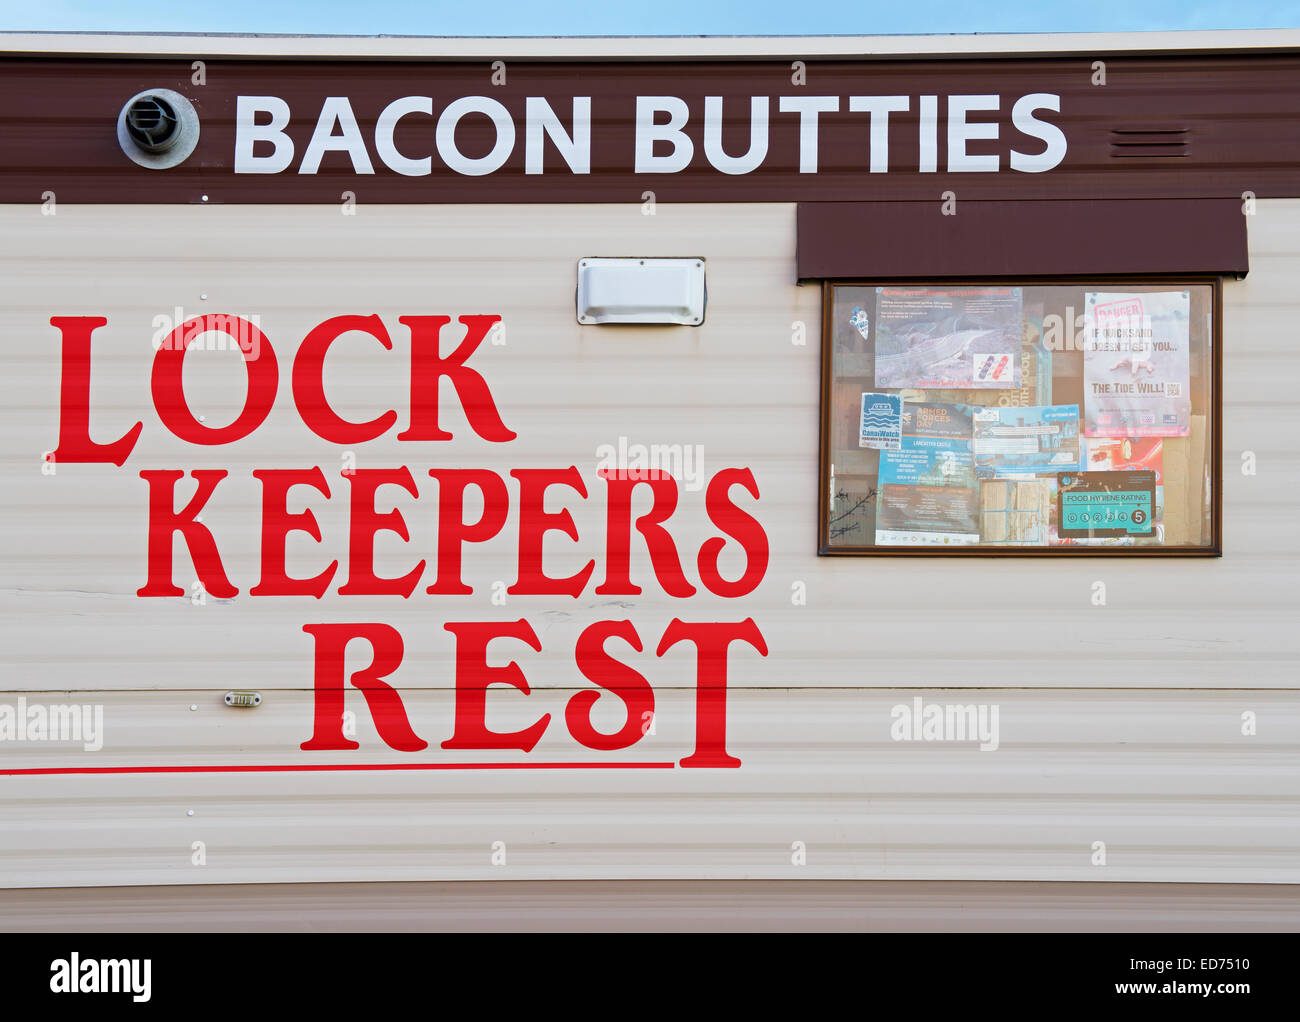 Sign on wall of café, Lock Keepers Rest, Bacon Butties, England UK Stock Photo